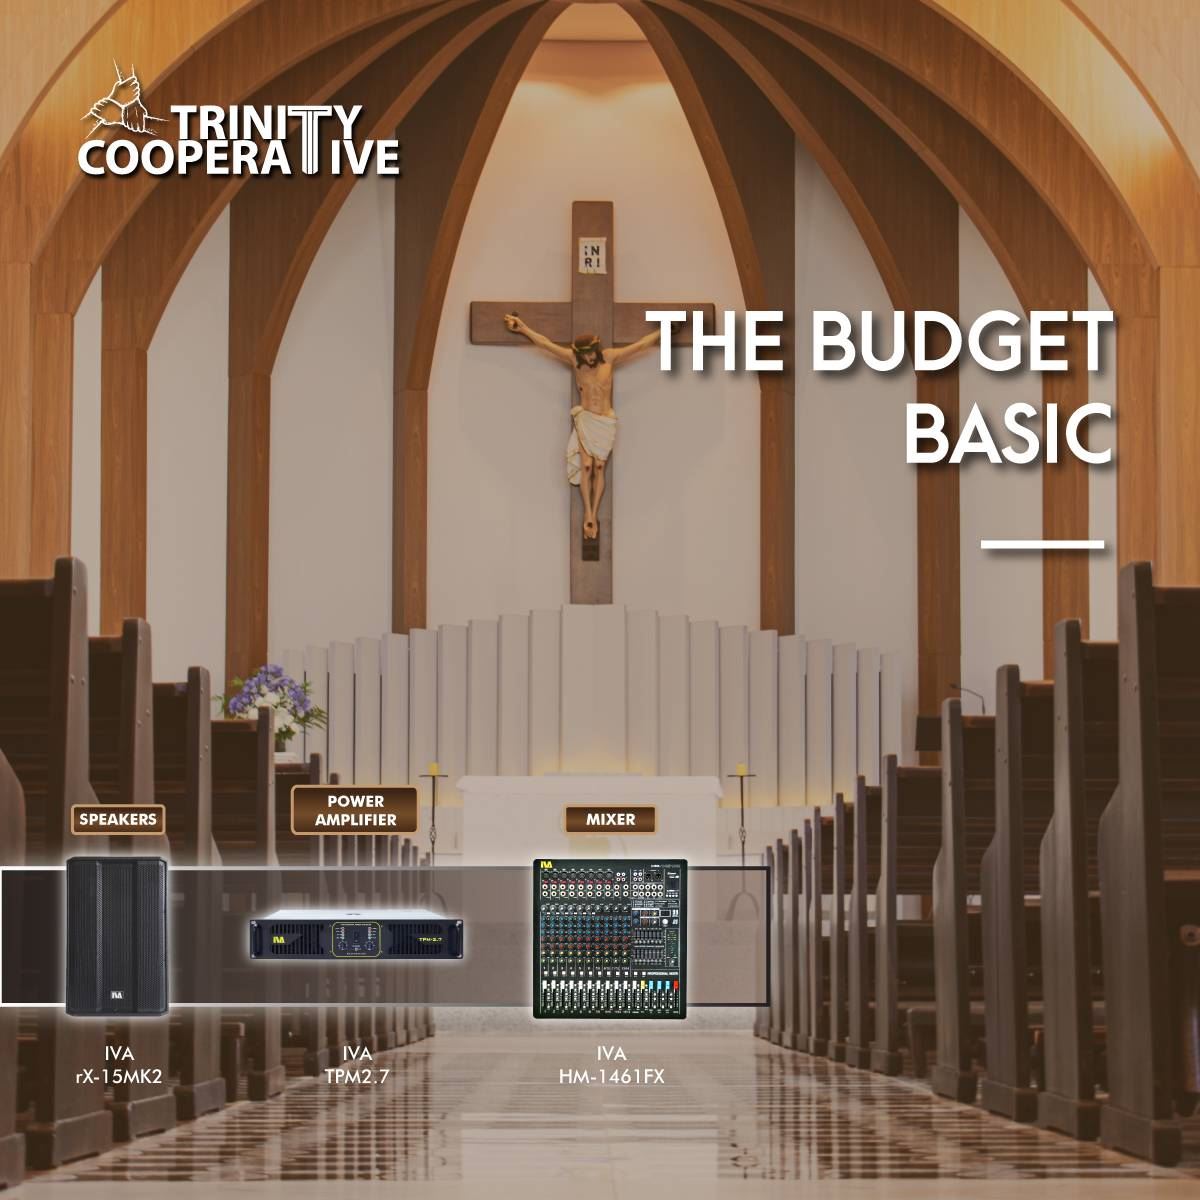 the-budget-basic-pa-sound-system-for-church-iva-rx-15mk2-tpm-27-hm-1461fx